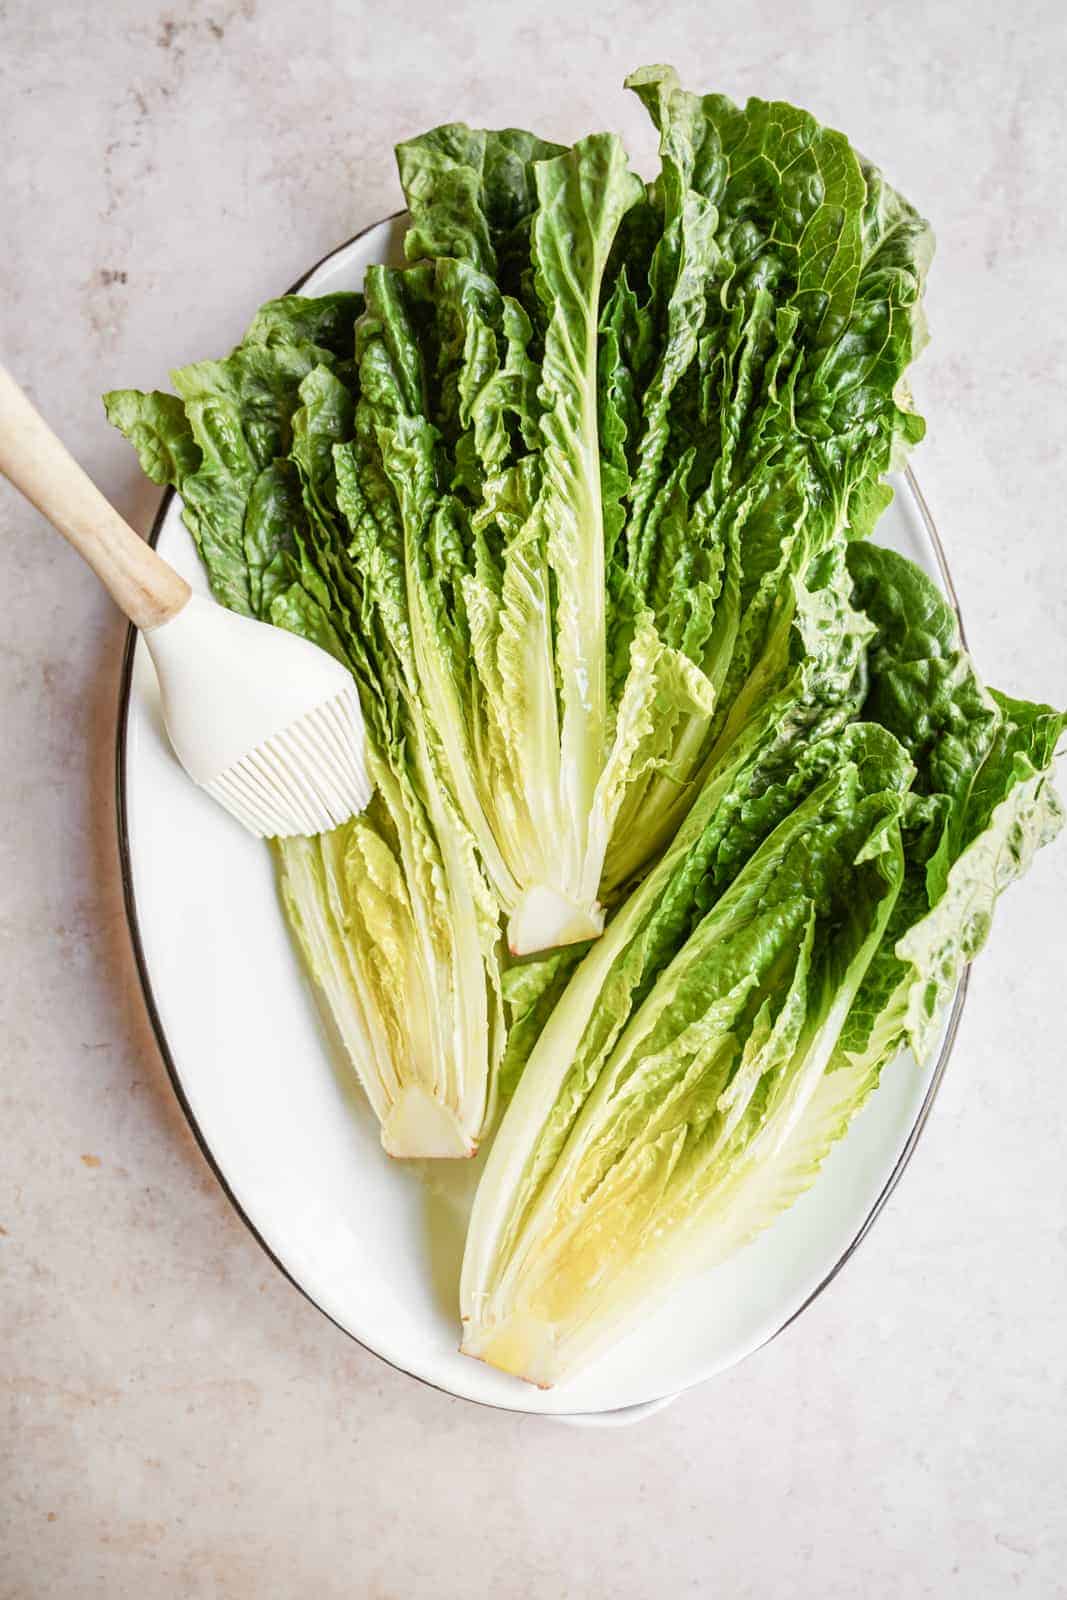 Romaine lettuce being brushed and ready to be grilled